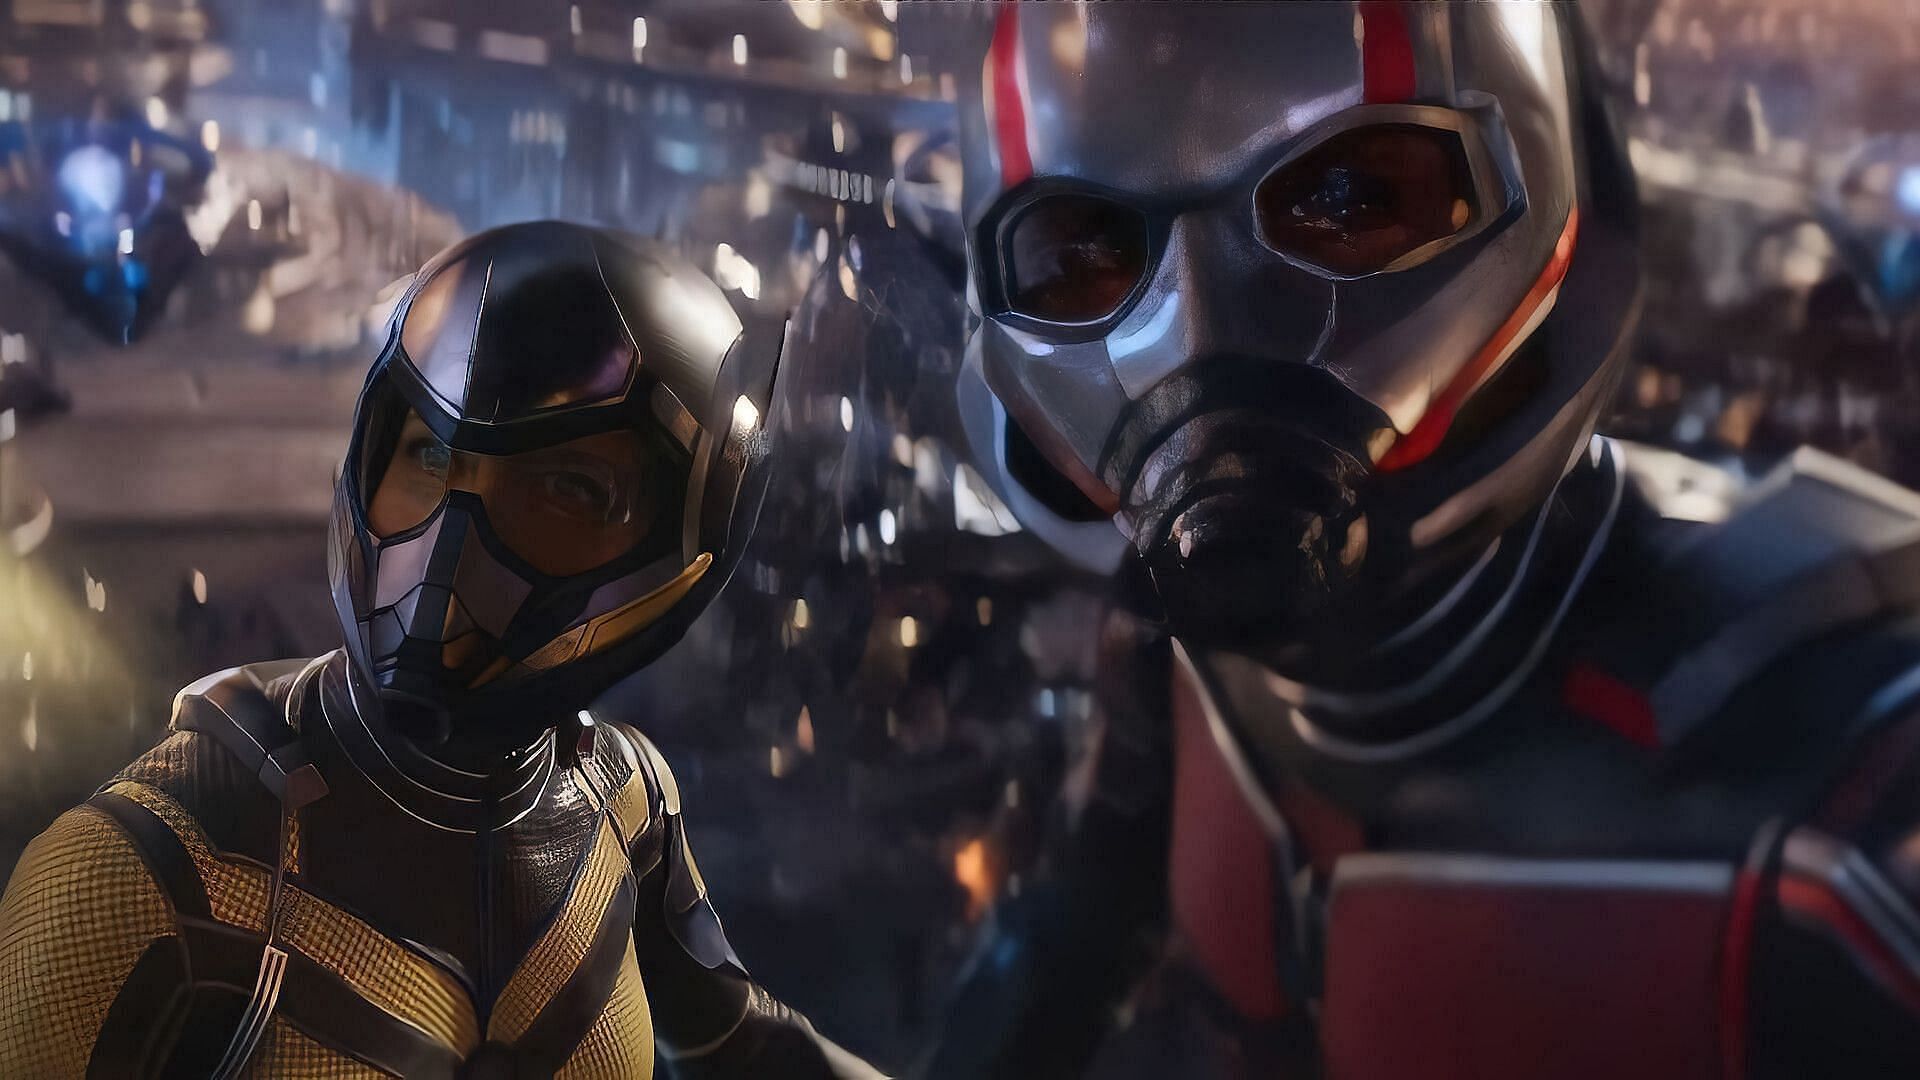 Ant-Man 3 Set For Marvel's Worst Ever Second Weekend Drop At The Box Office